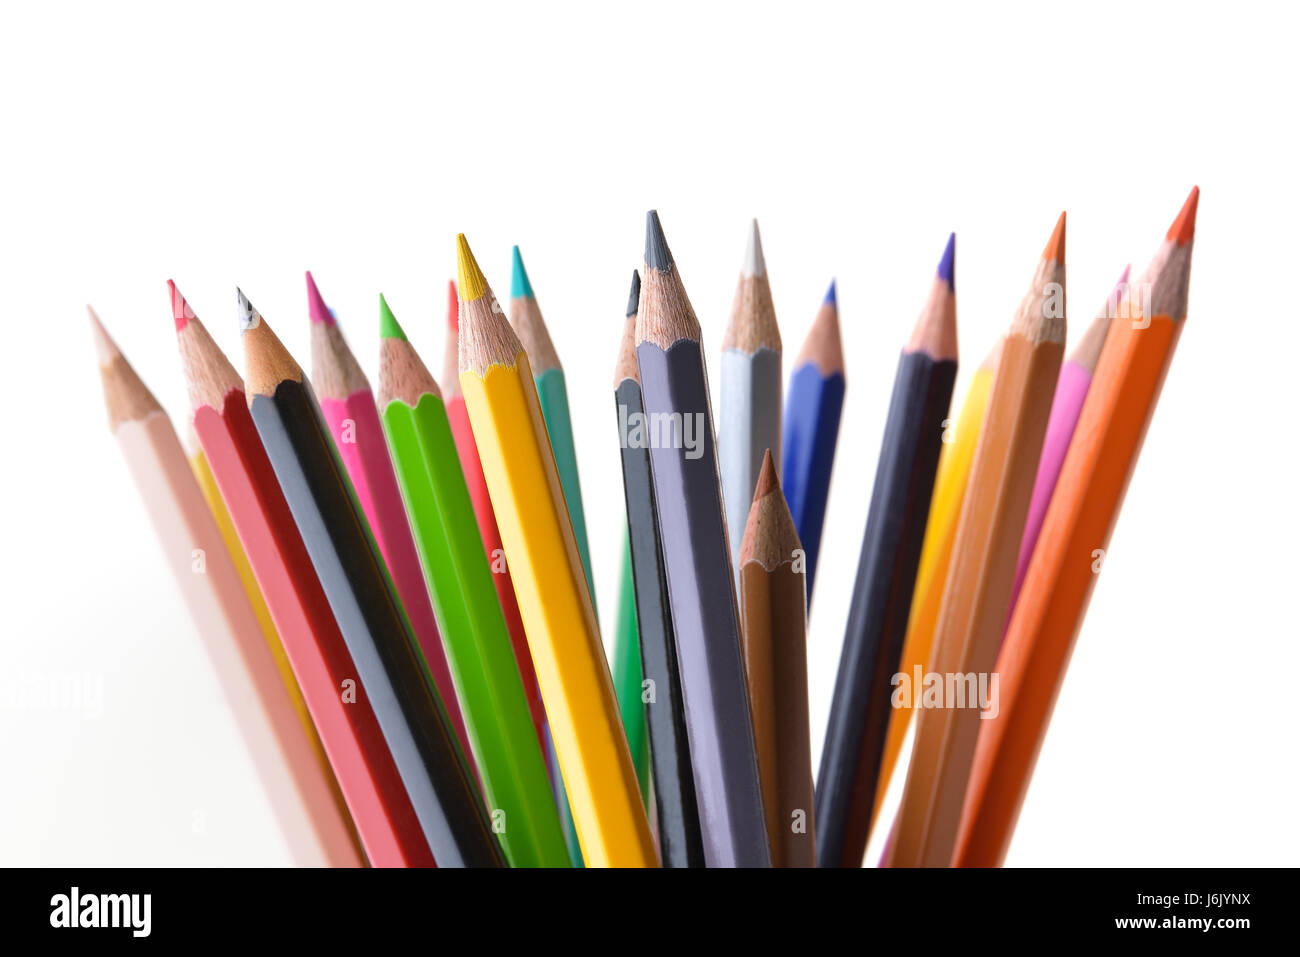 Assorted Multi Colored Pencils on White Background Stock Photo - Alamy